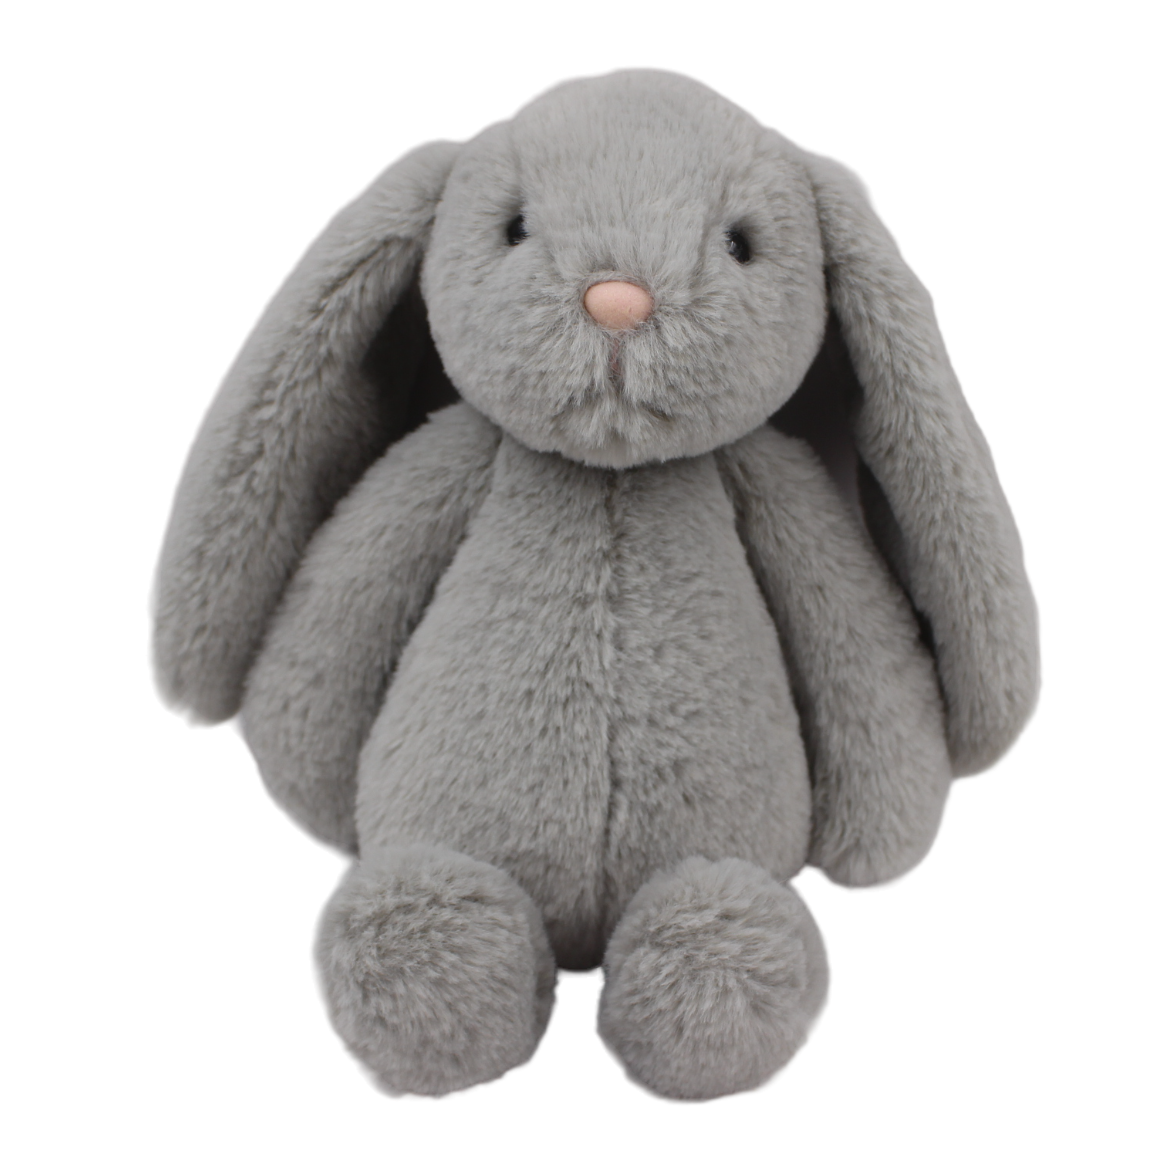 NEW - Petite Vous Ziggy the Bunny Soft Toy